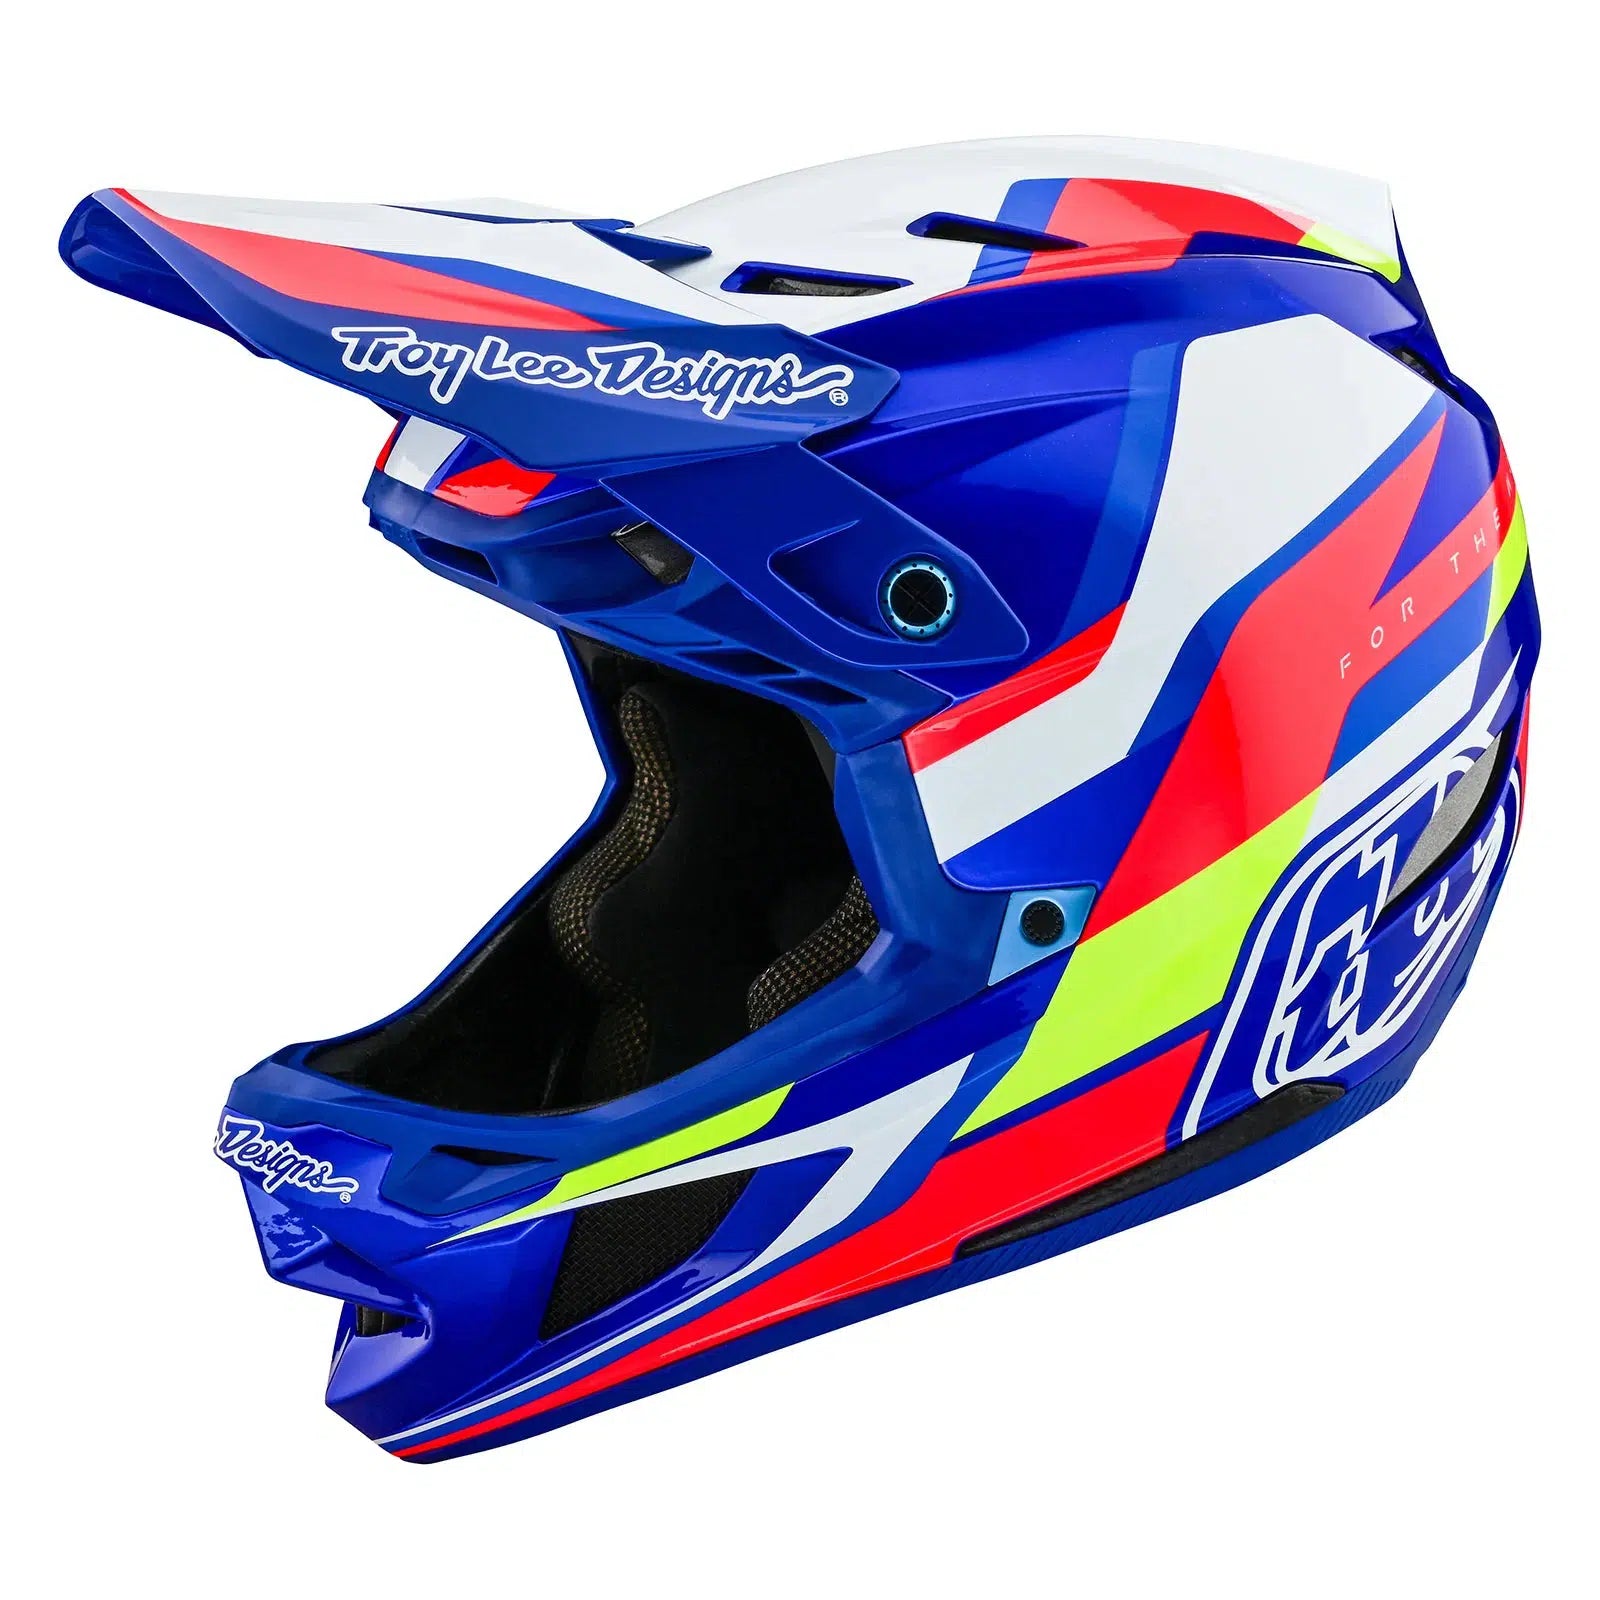 A TLD D4 AS Composite Helmet W/MIPS Omega Blue / White with a red, blue, and yellow design featuring the Mips protection system for improved helmet safety.